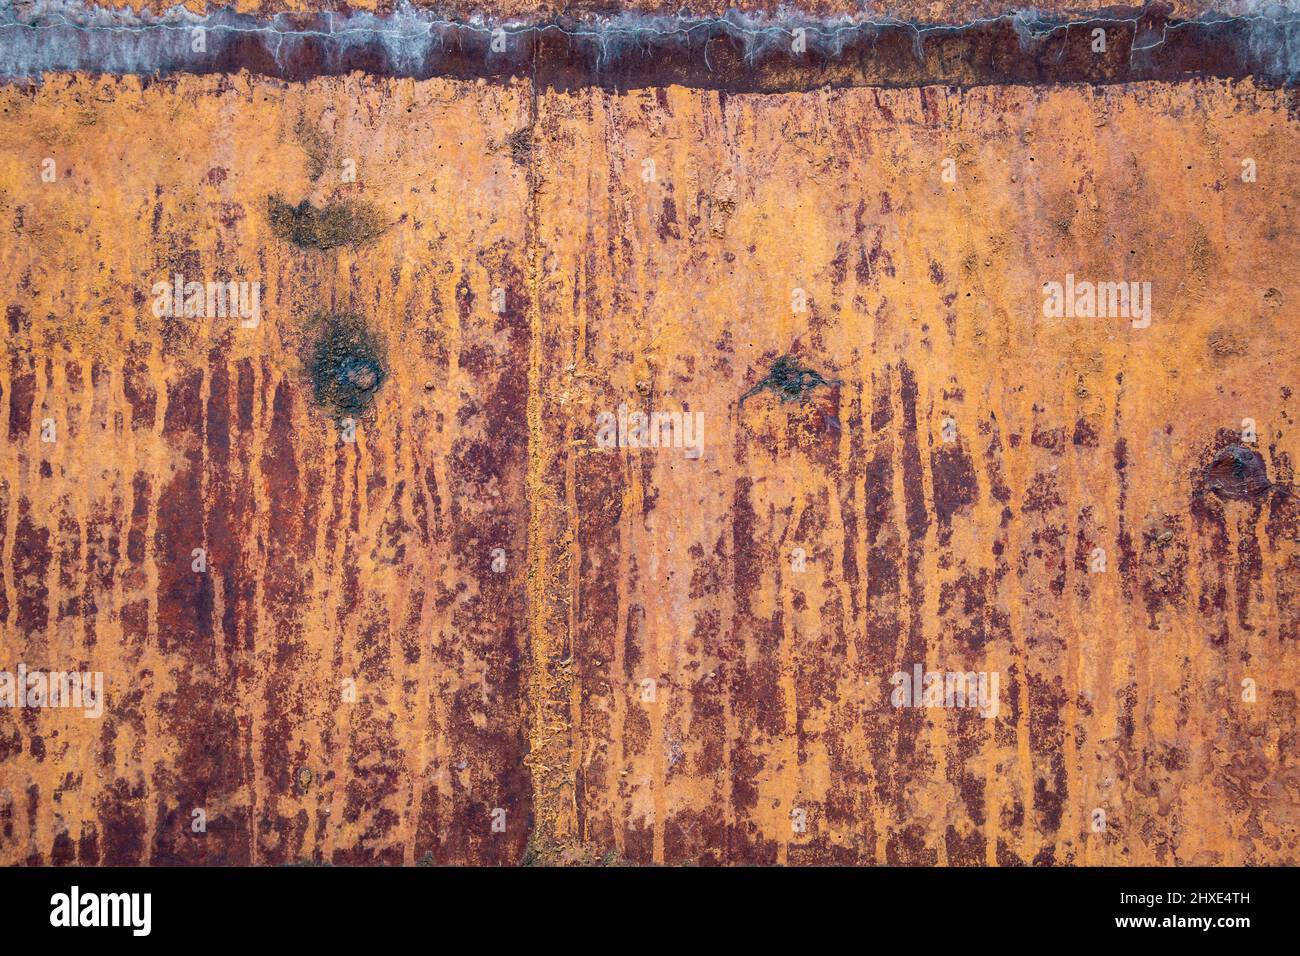 Rusty stained and marked stone wall for texture or background Stock Photo